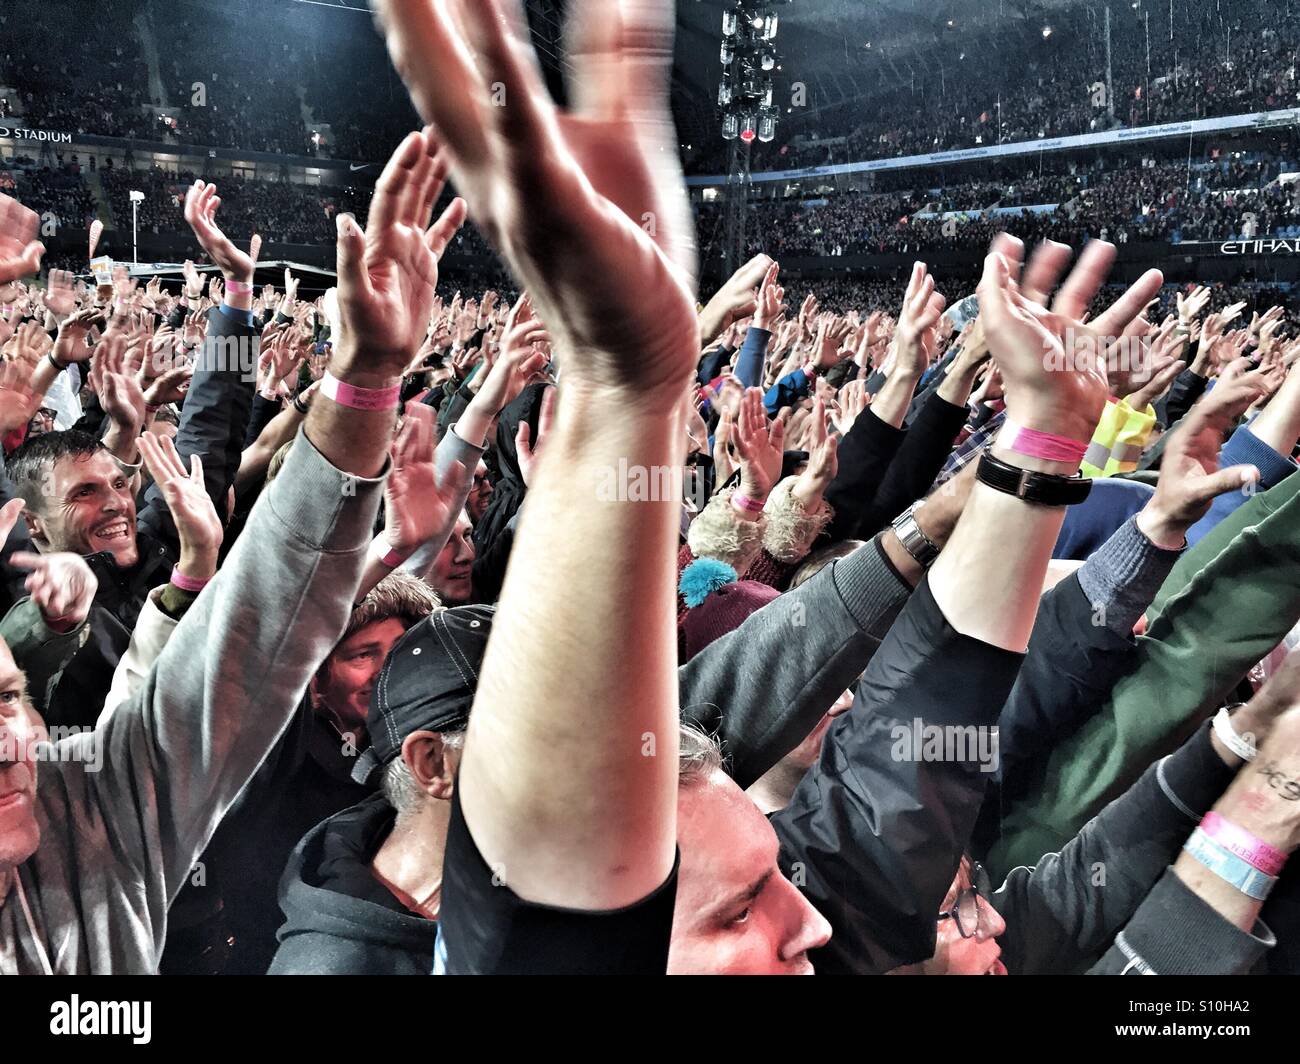 Fans wave their hands at a rock concert Stock Photo